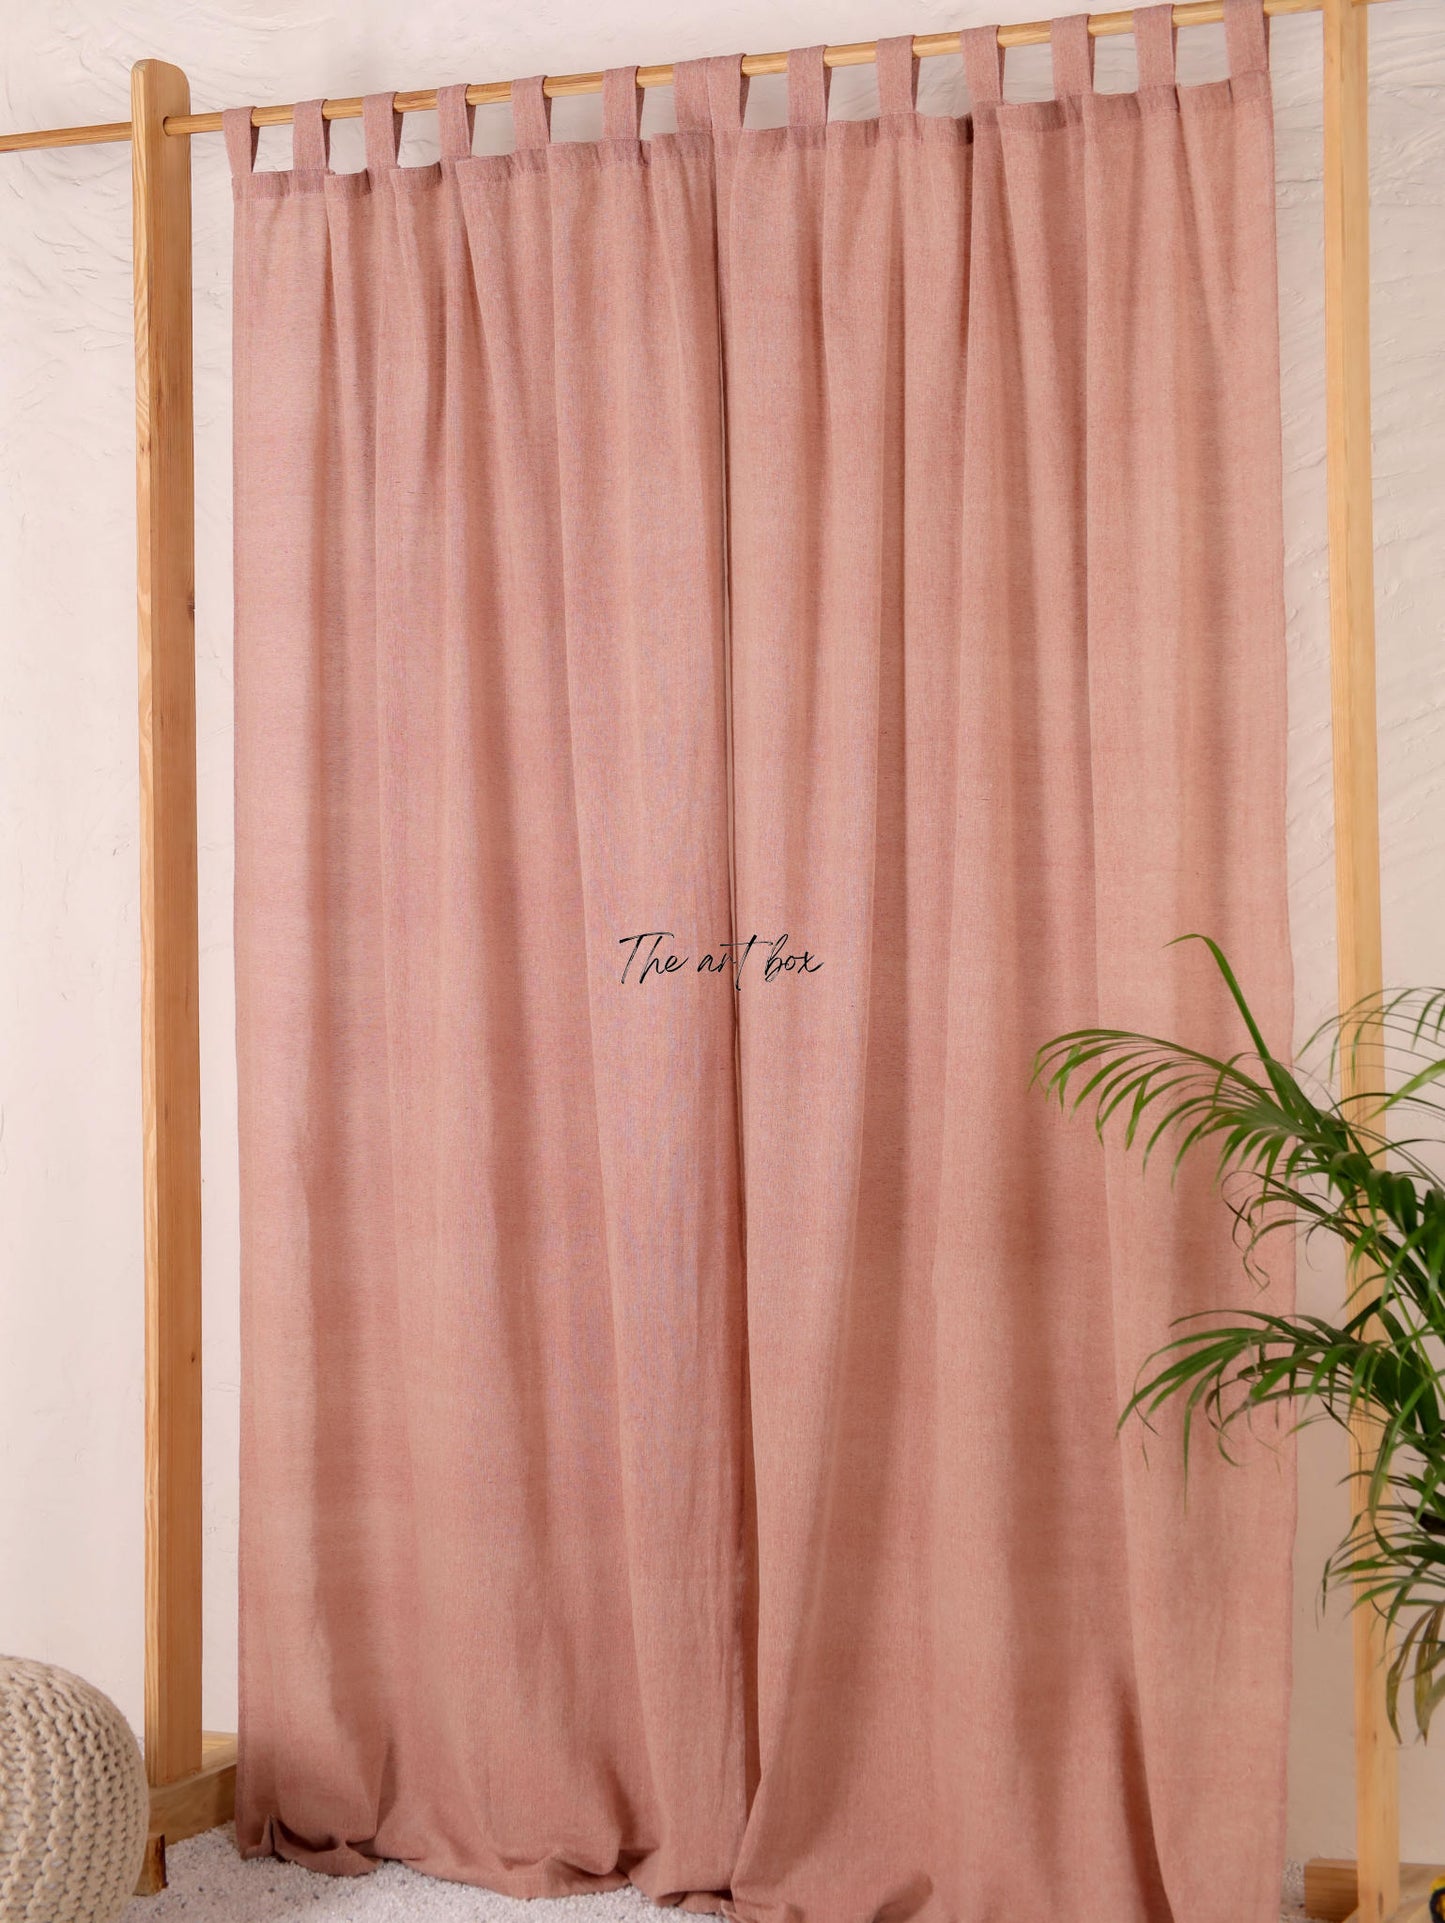 Linen Gauze with Maroon Stripes Curtains- 2 Panel set